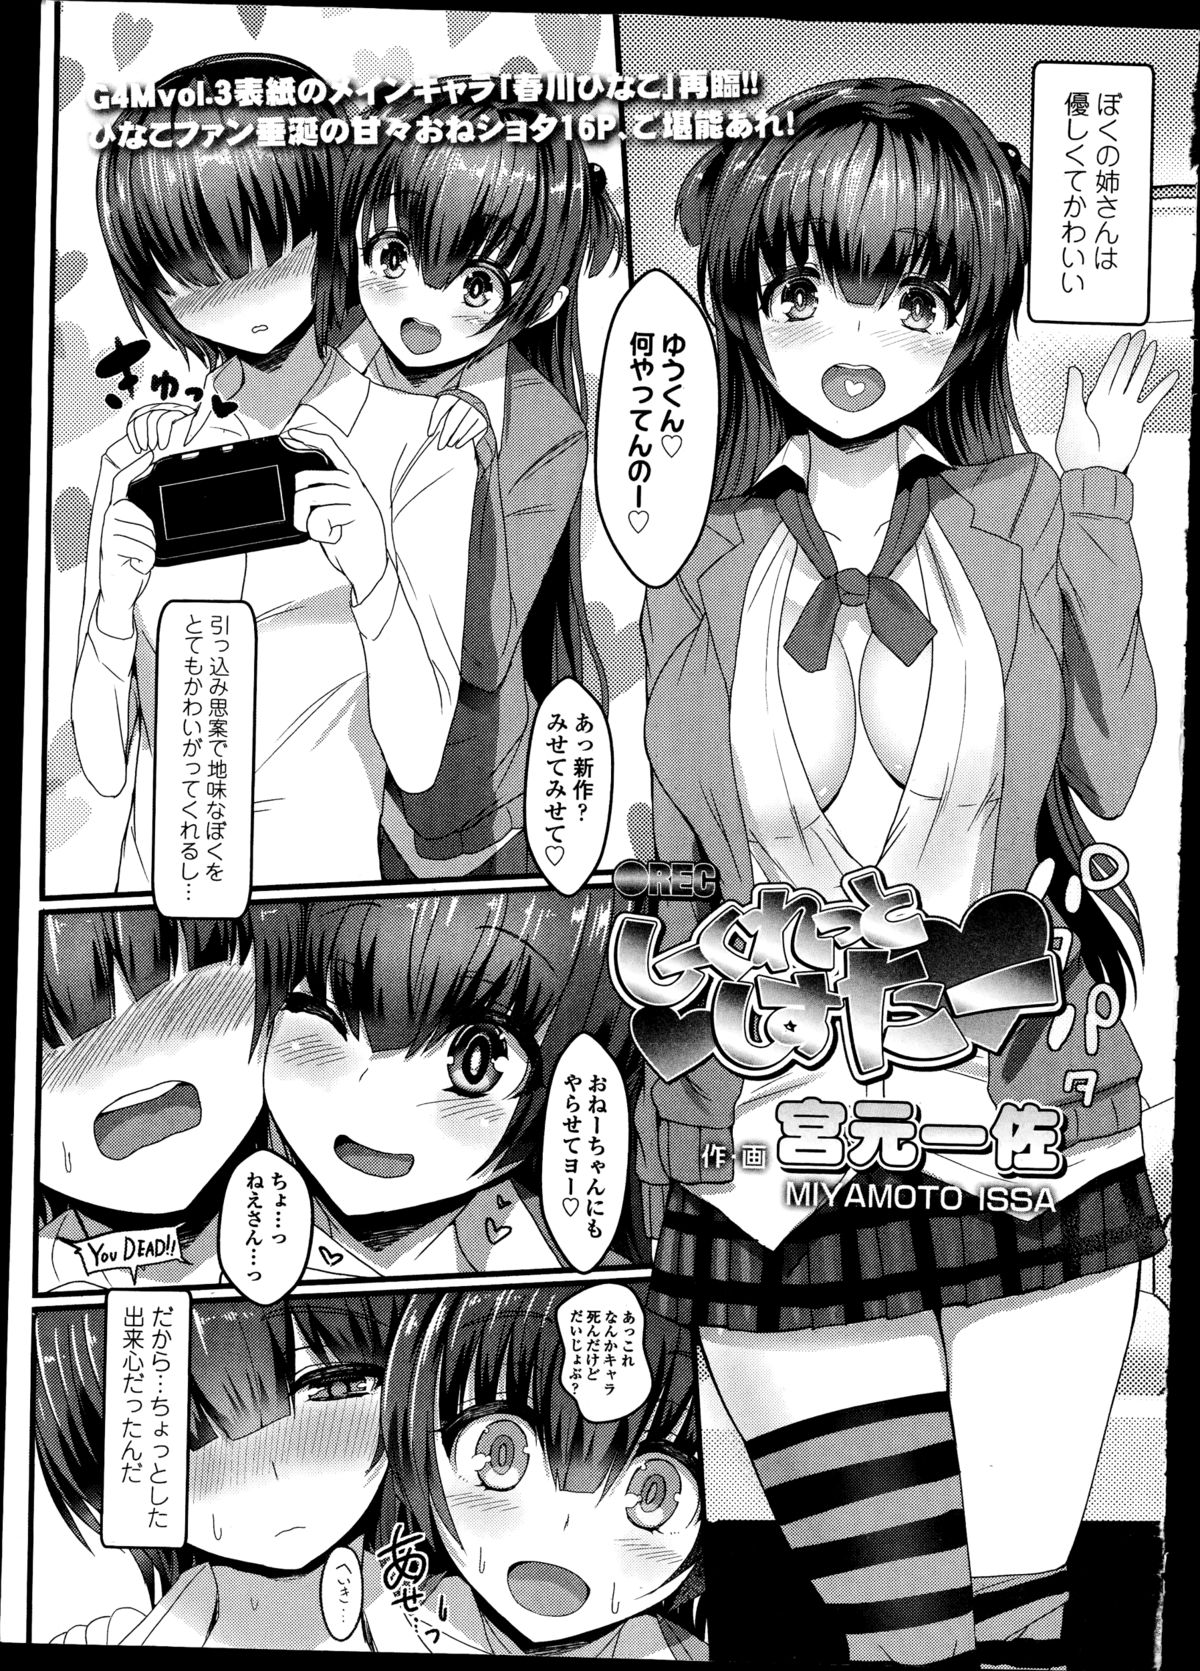 Girls forM Vol. 08 page 7 full